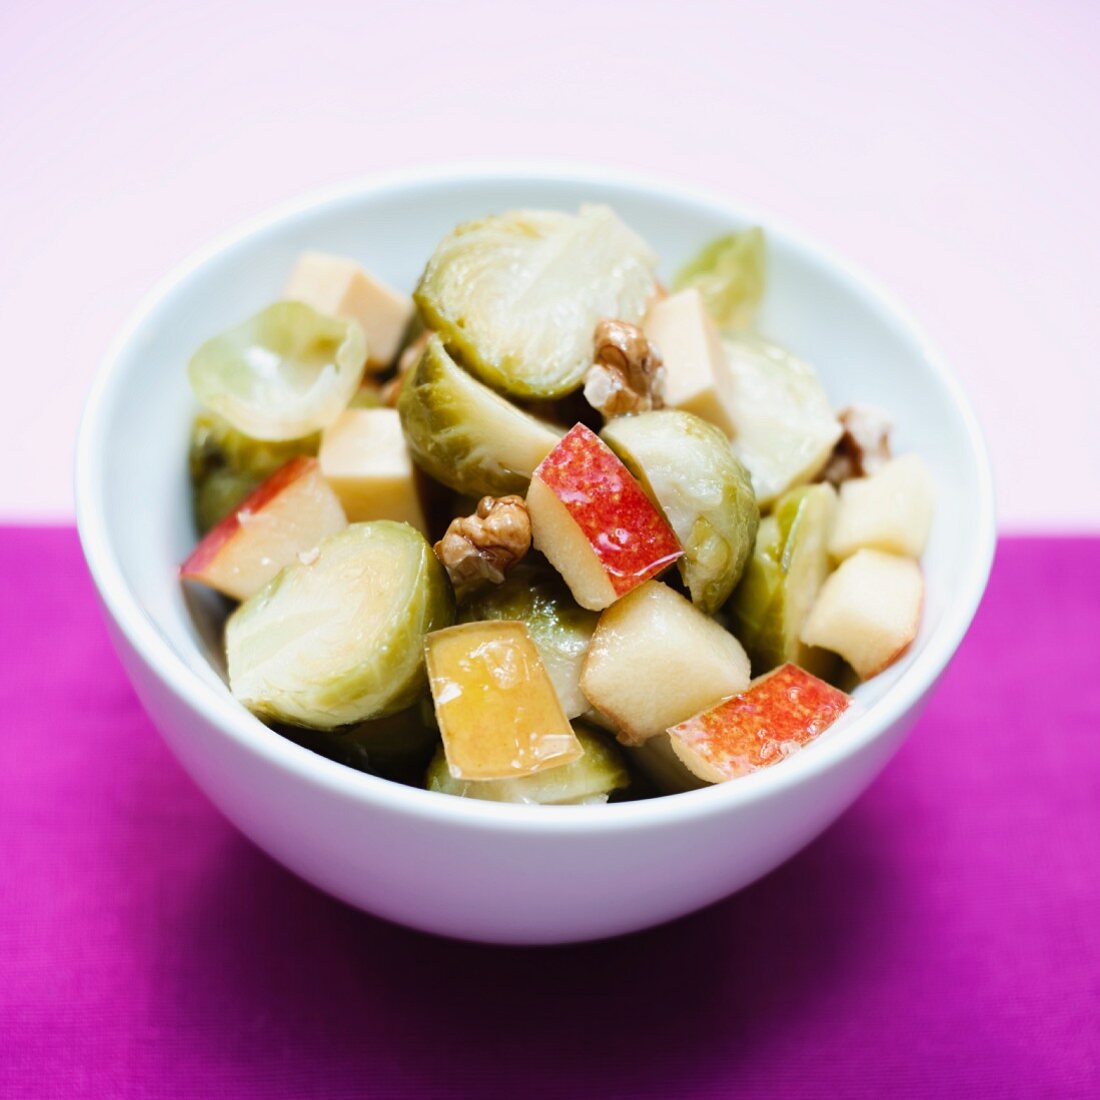 Brussels sprouts salad with apple